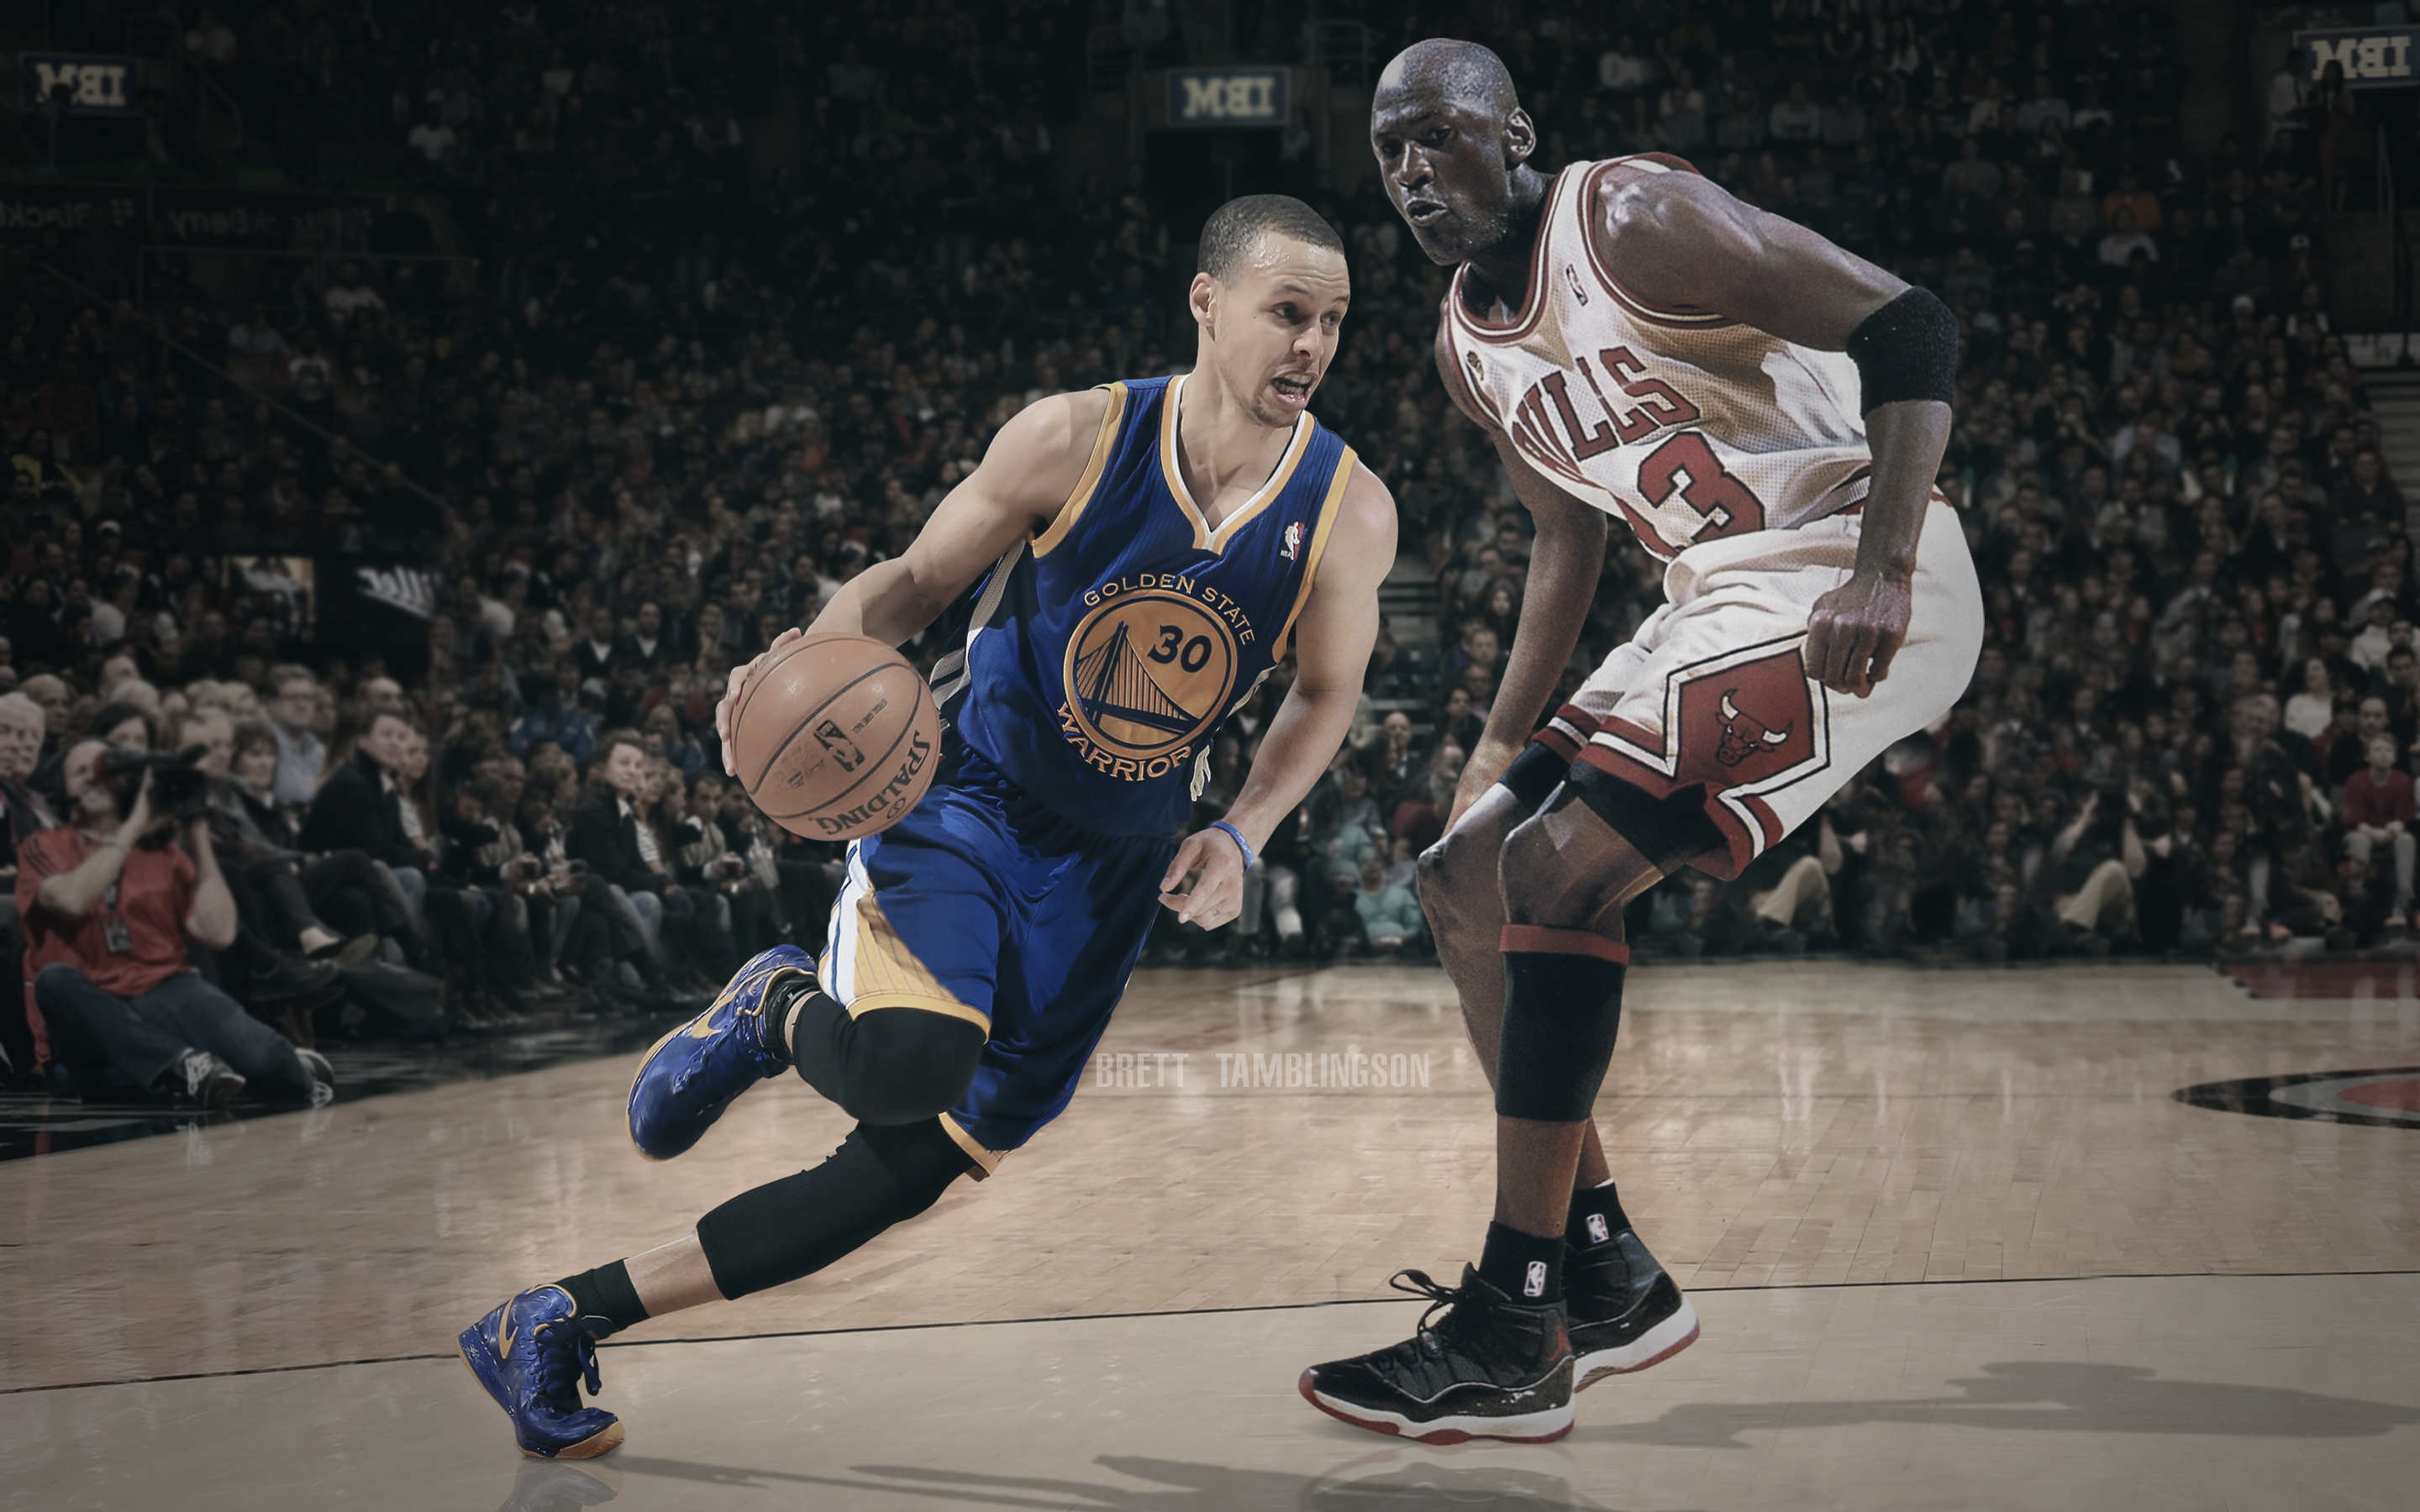 Michael Jordan And Stephen Curry Wallpapers - Wallpaper Cave